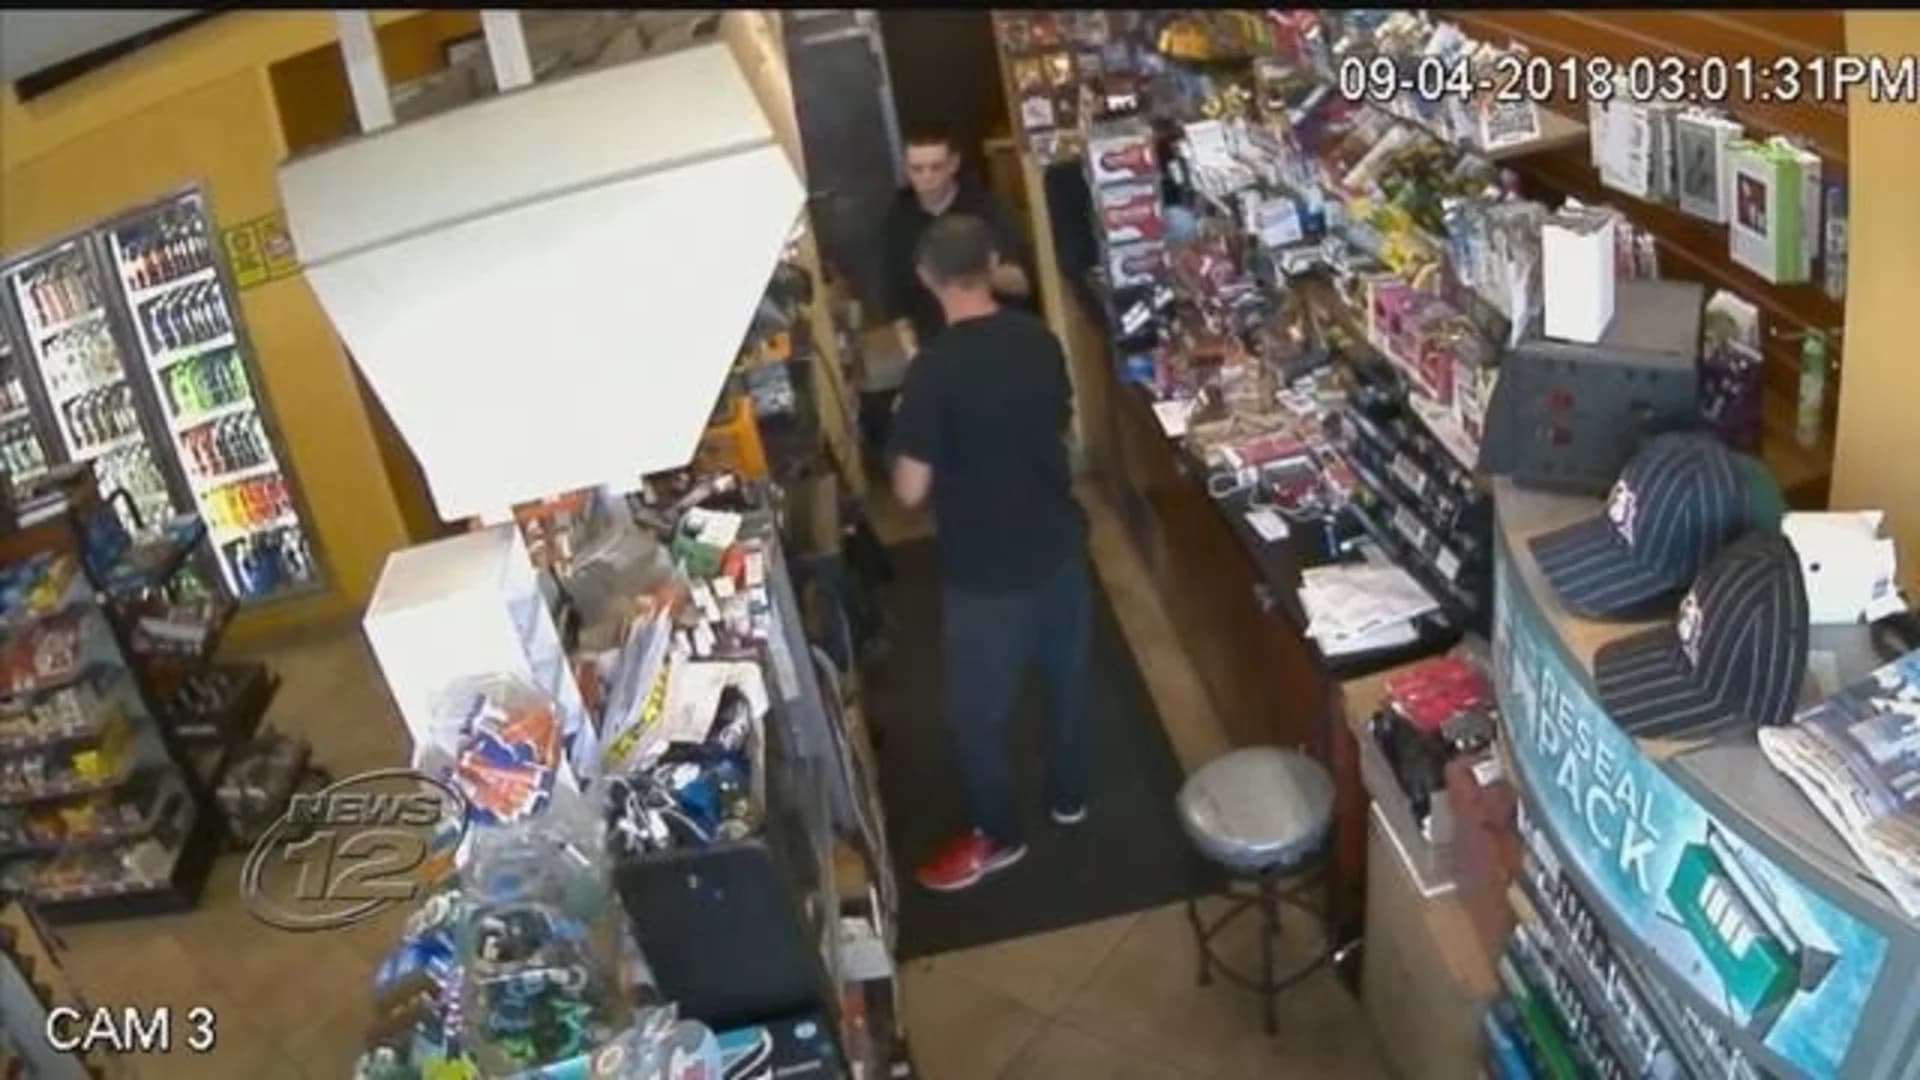 Police: Surveillance video helps nab would-be gas station robber